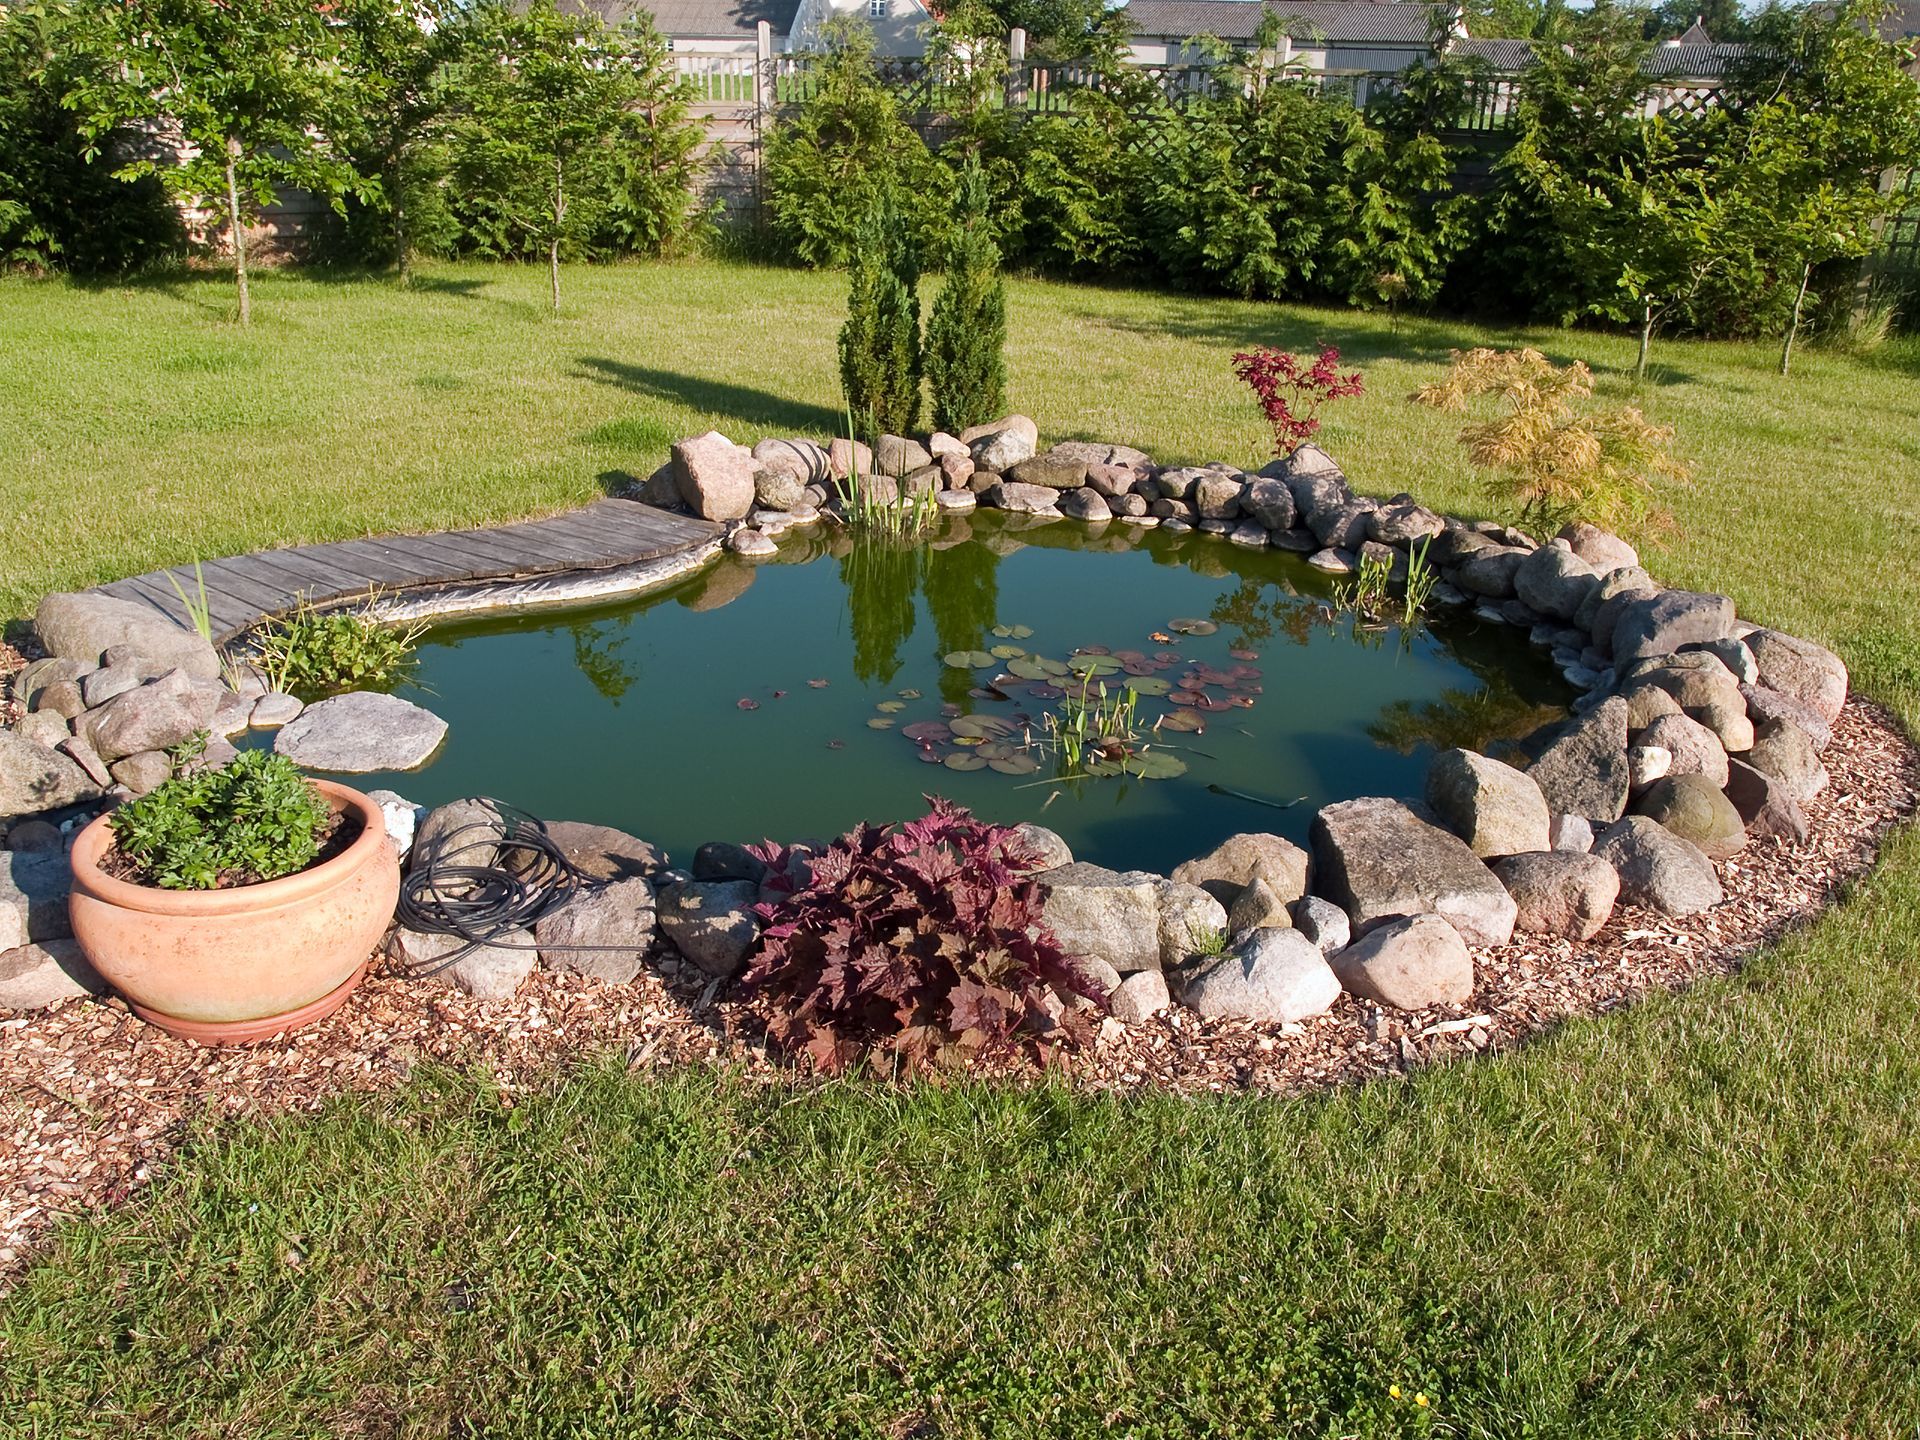  Fish pond built in the courtyard of a commercial clients business surrounded by grass